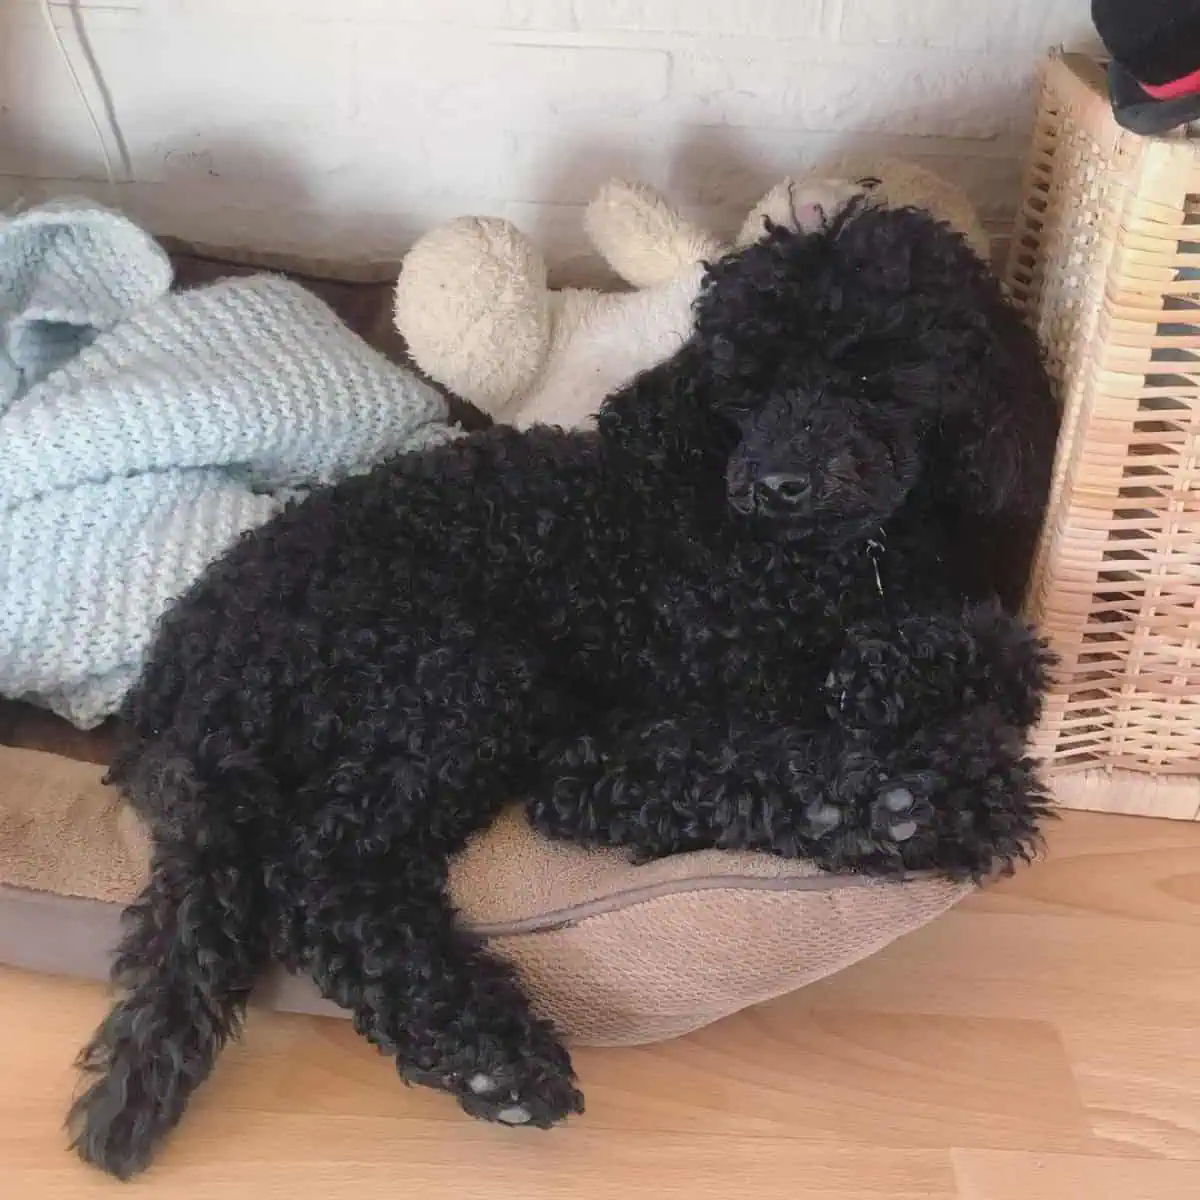 Poodle on his bed